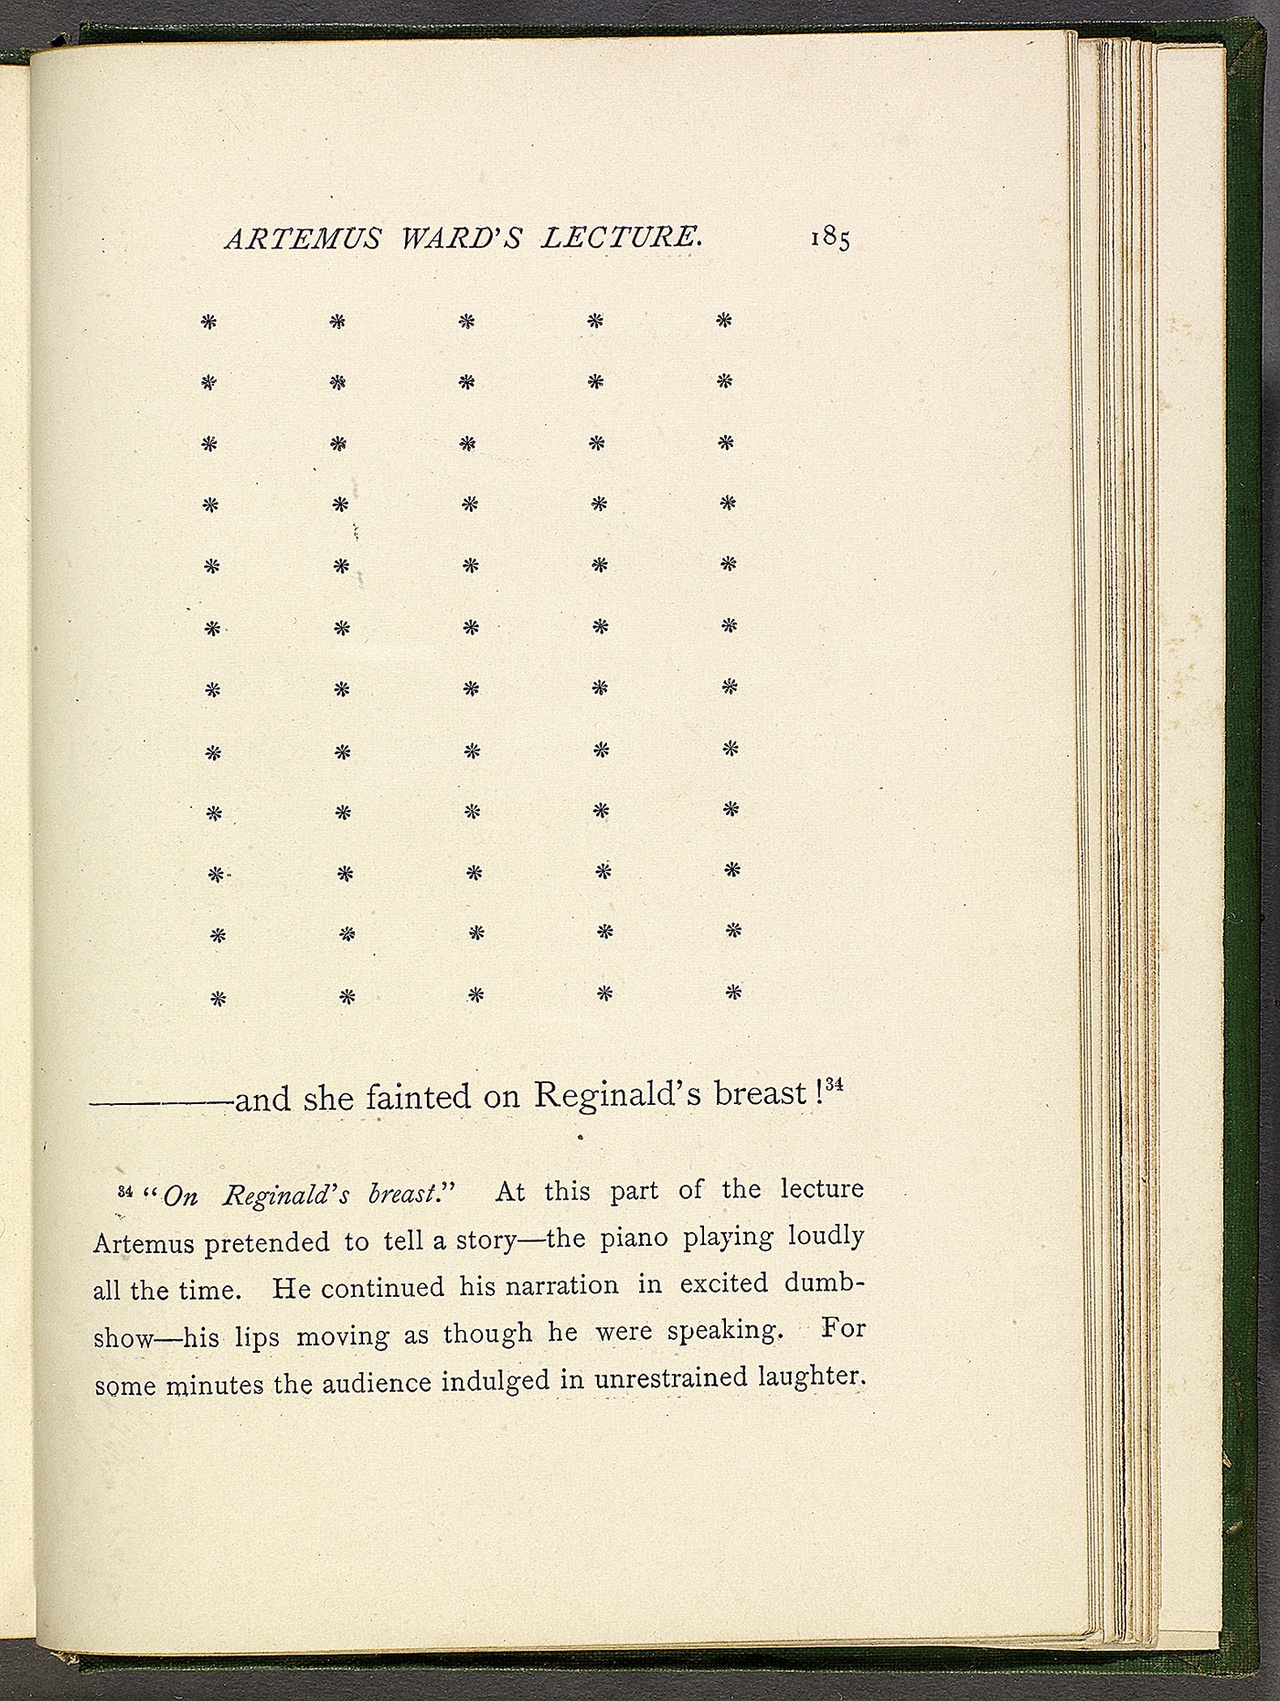 „Artemus Ward’s Lecture (As Delivered at the Egyptian Hall, London)“, 1869